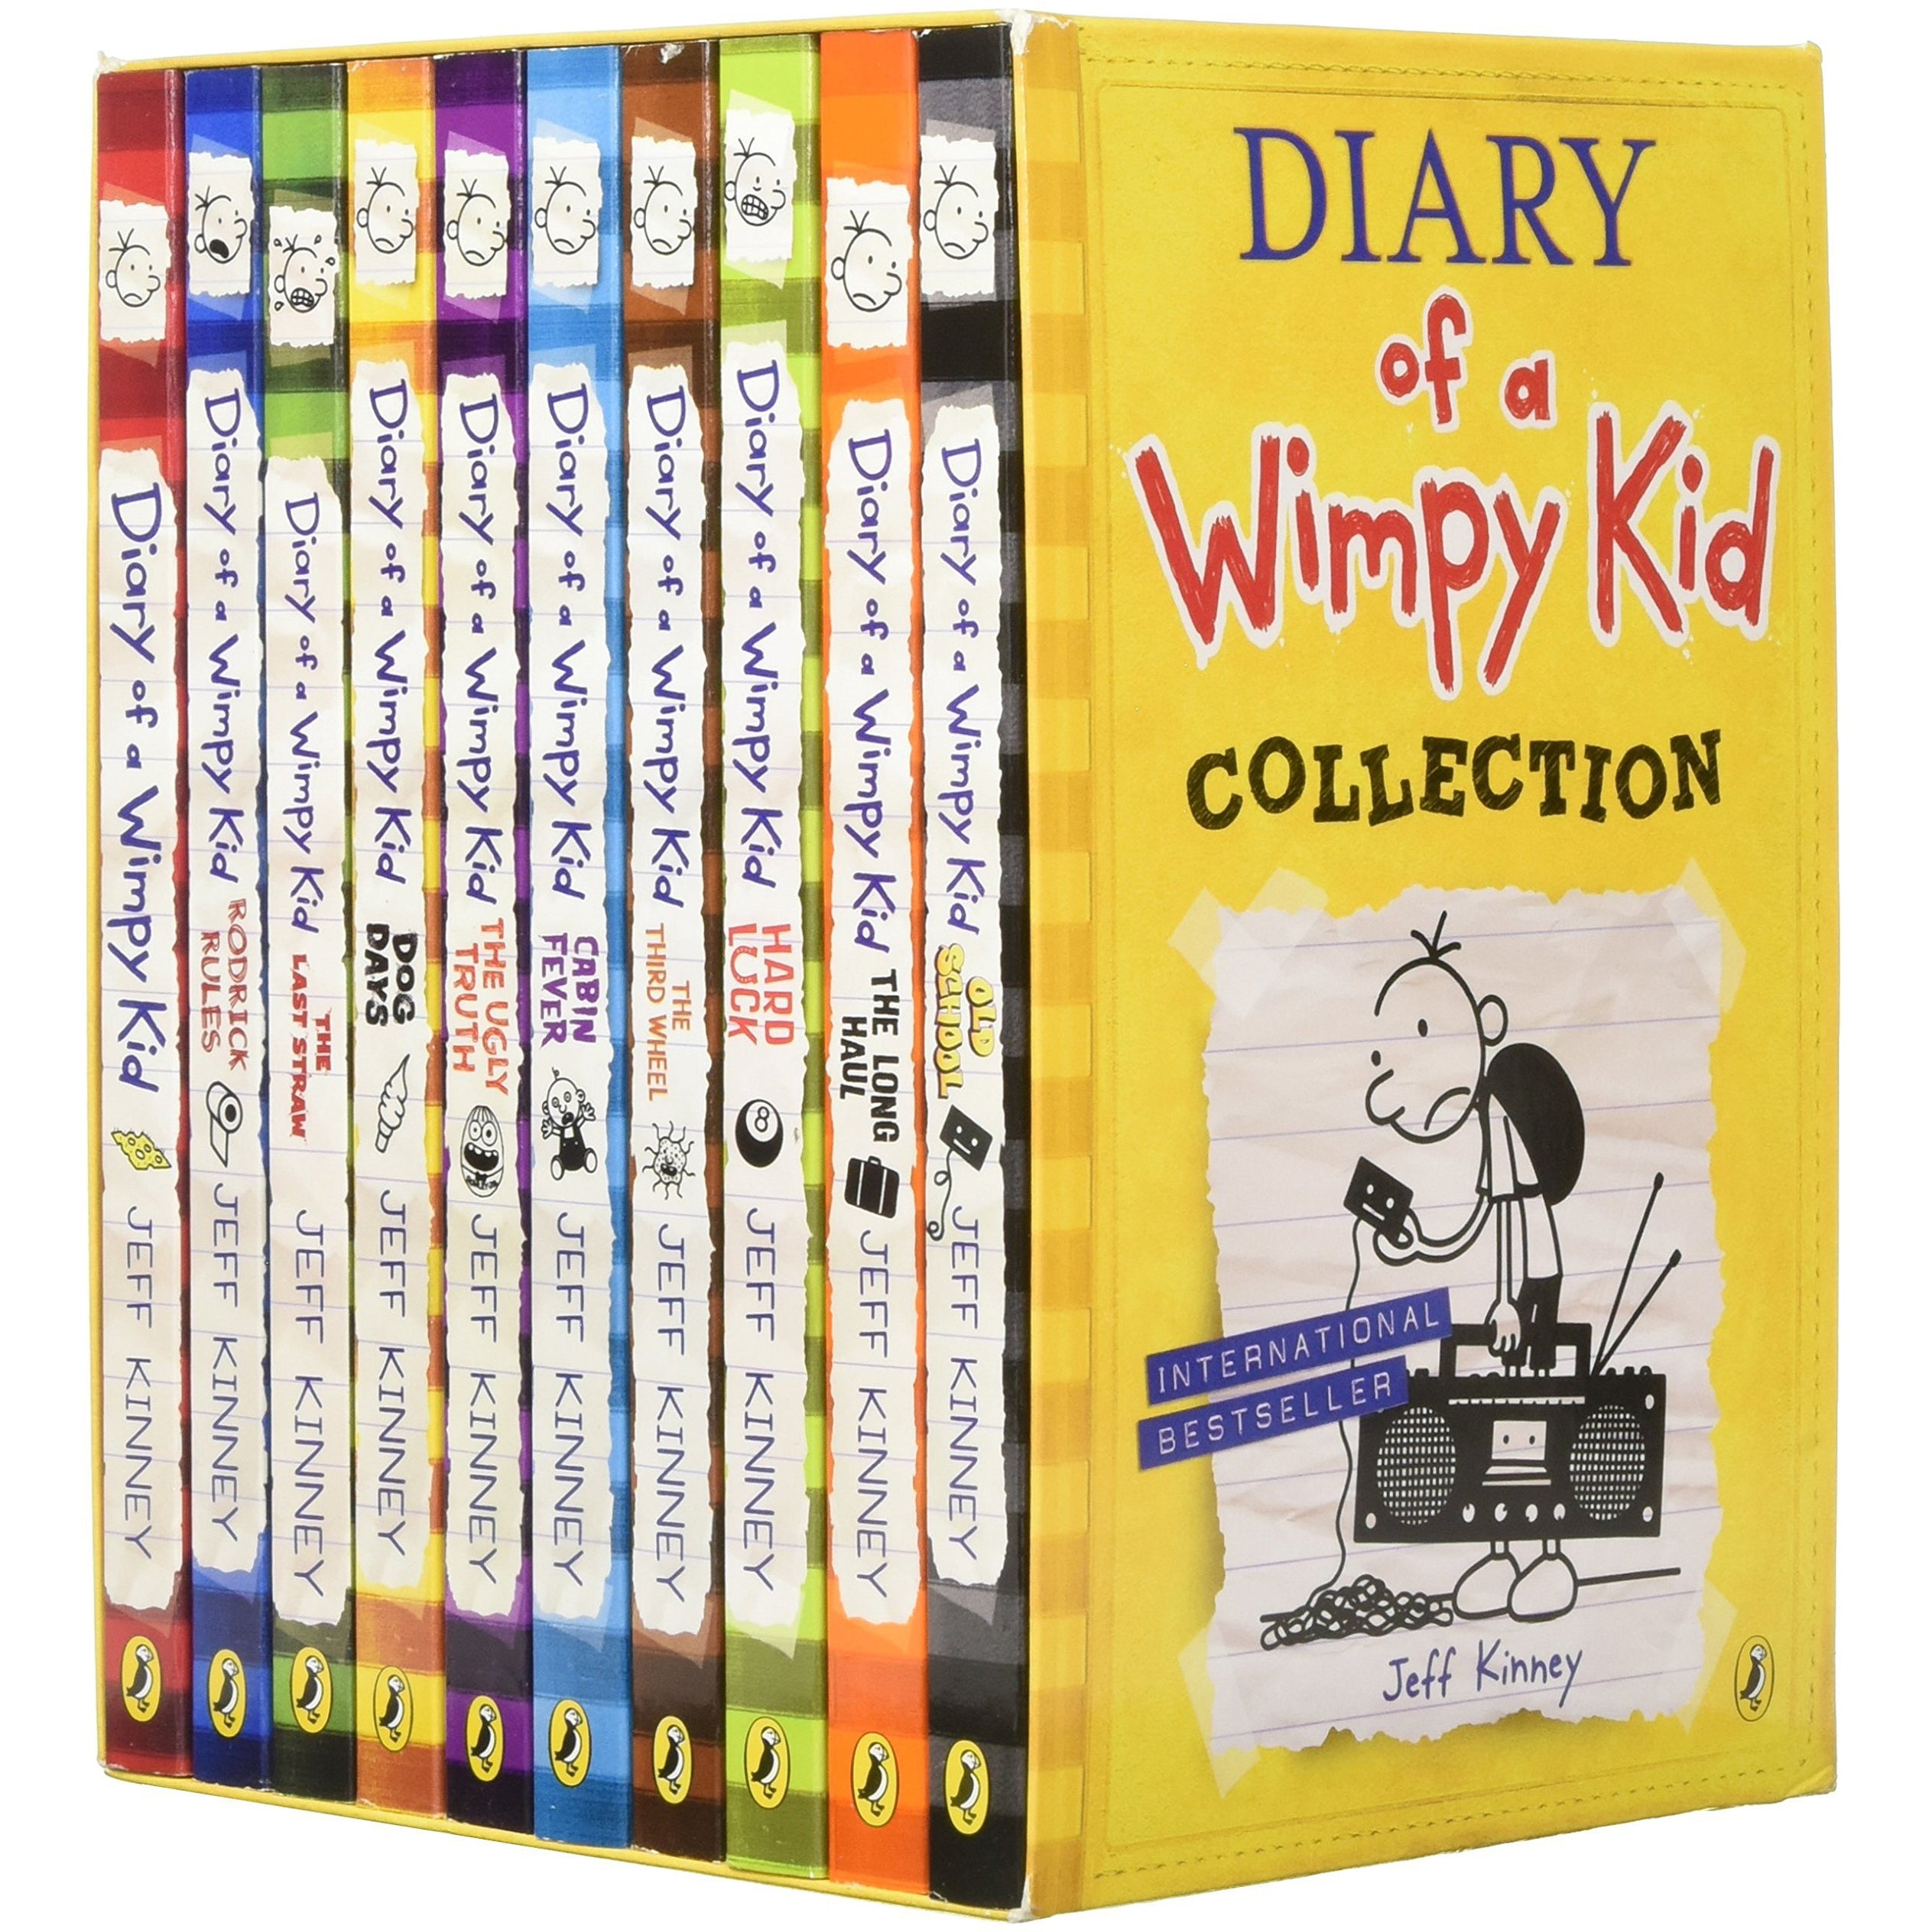 newest diary of a wimpy kid book